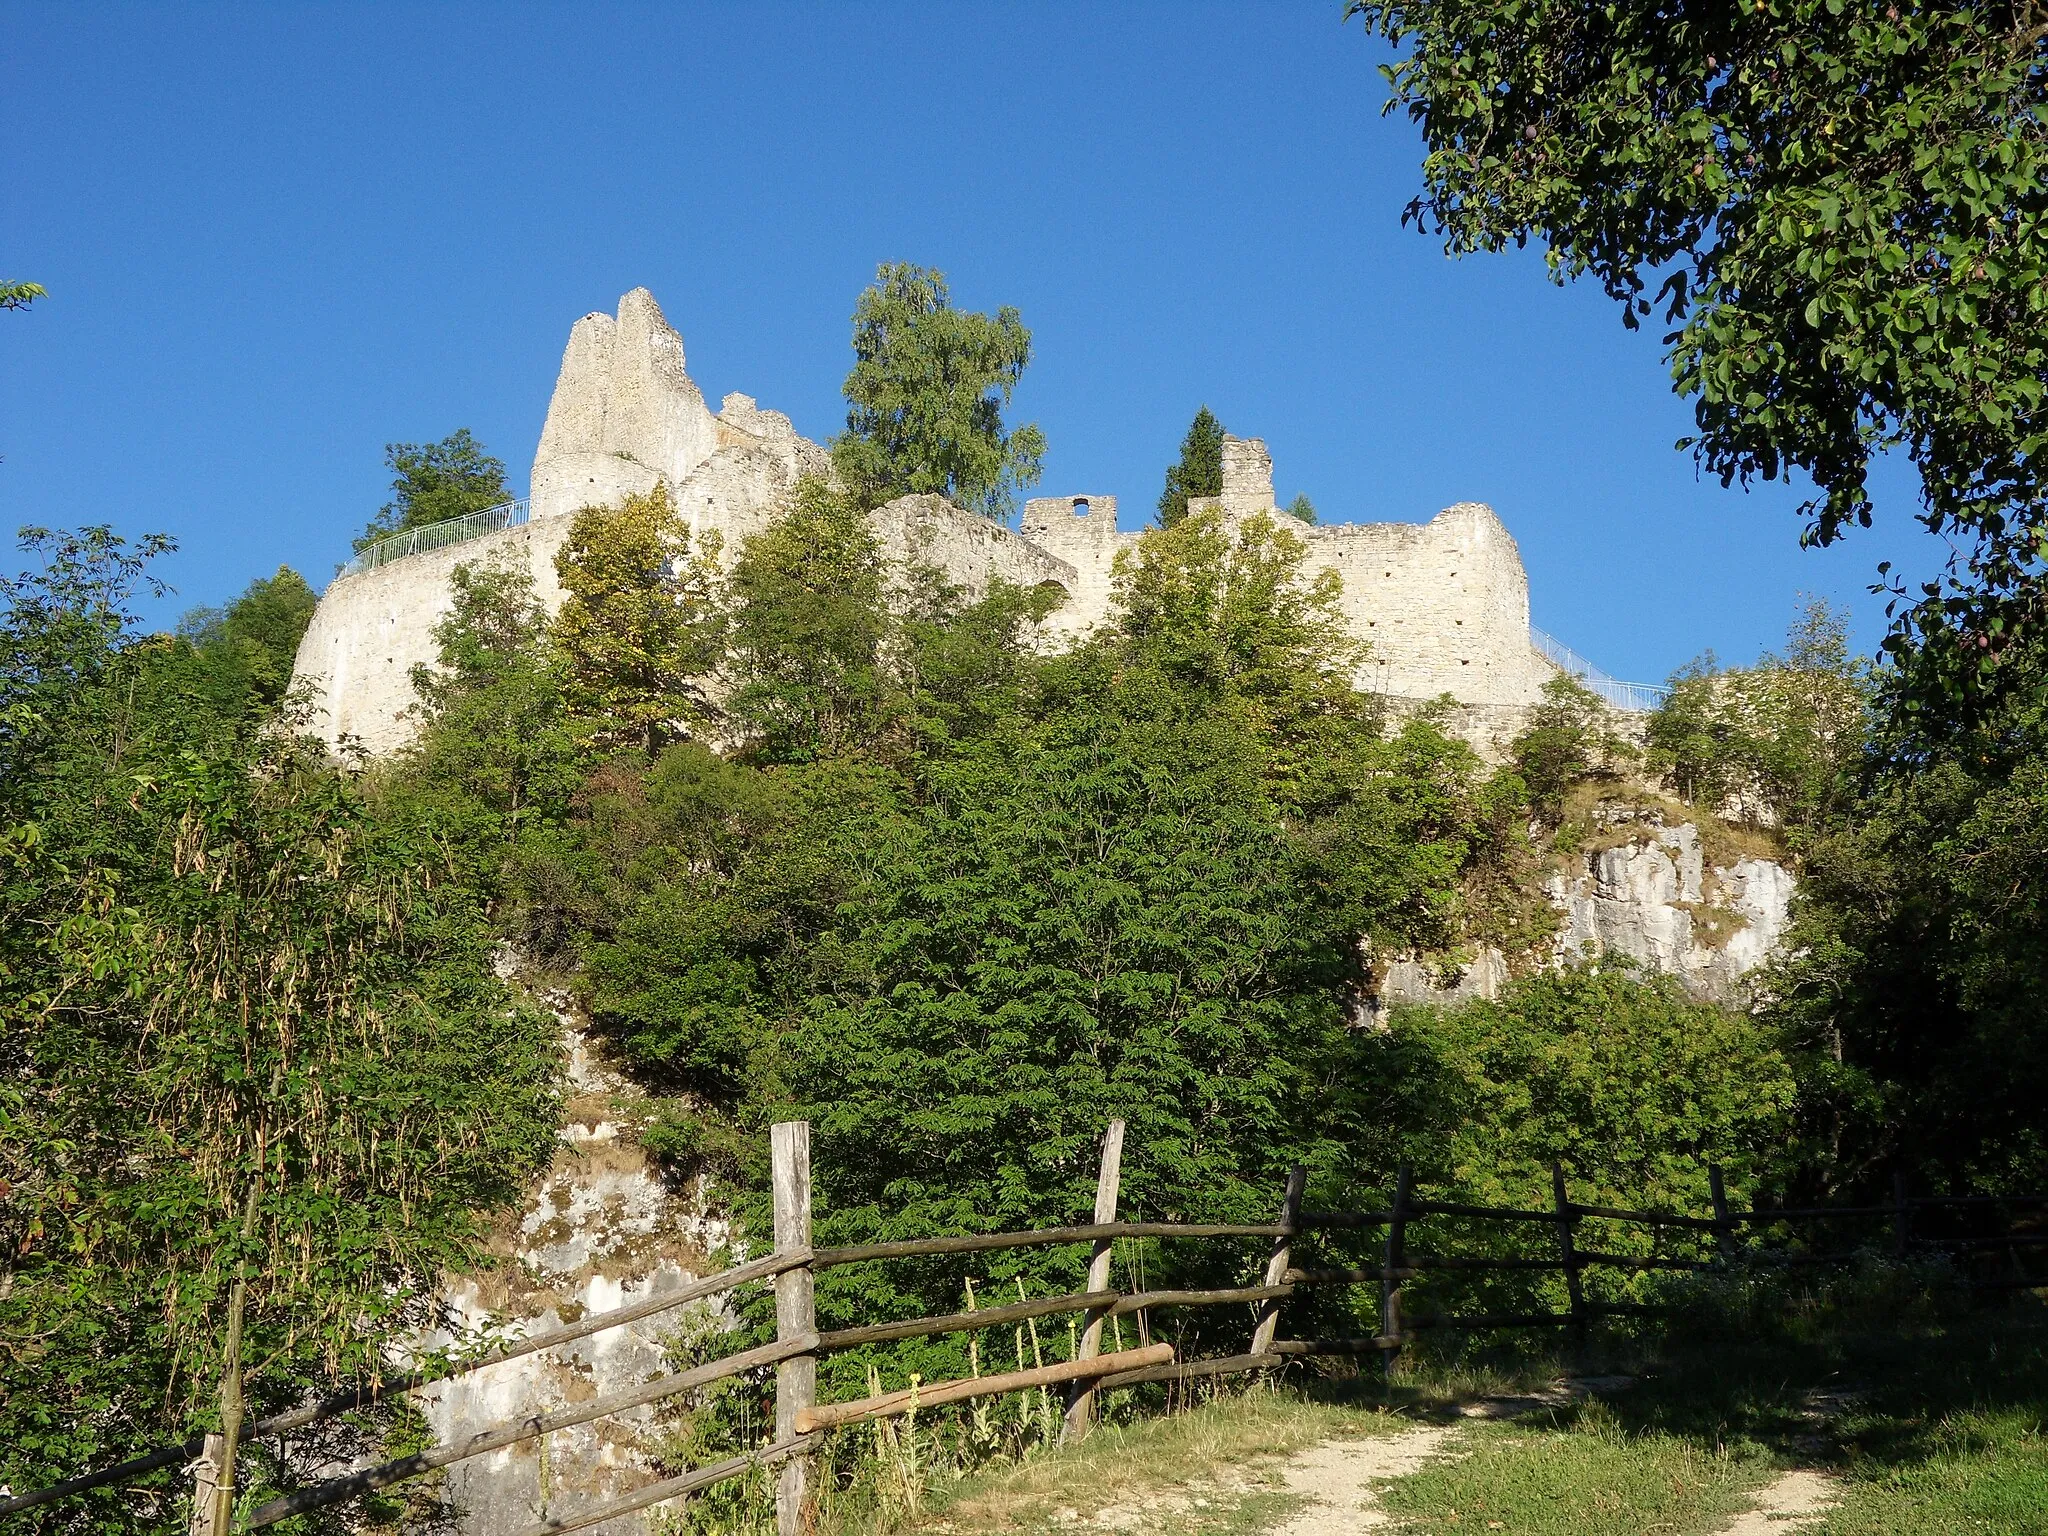 Photo showing: The ruin viewed from the path leading up to it.